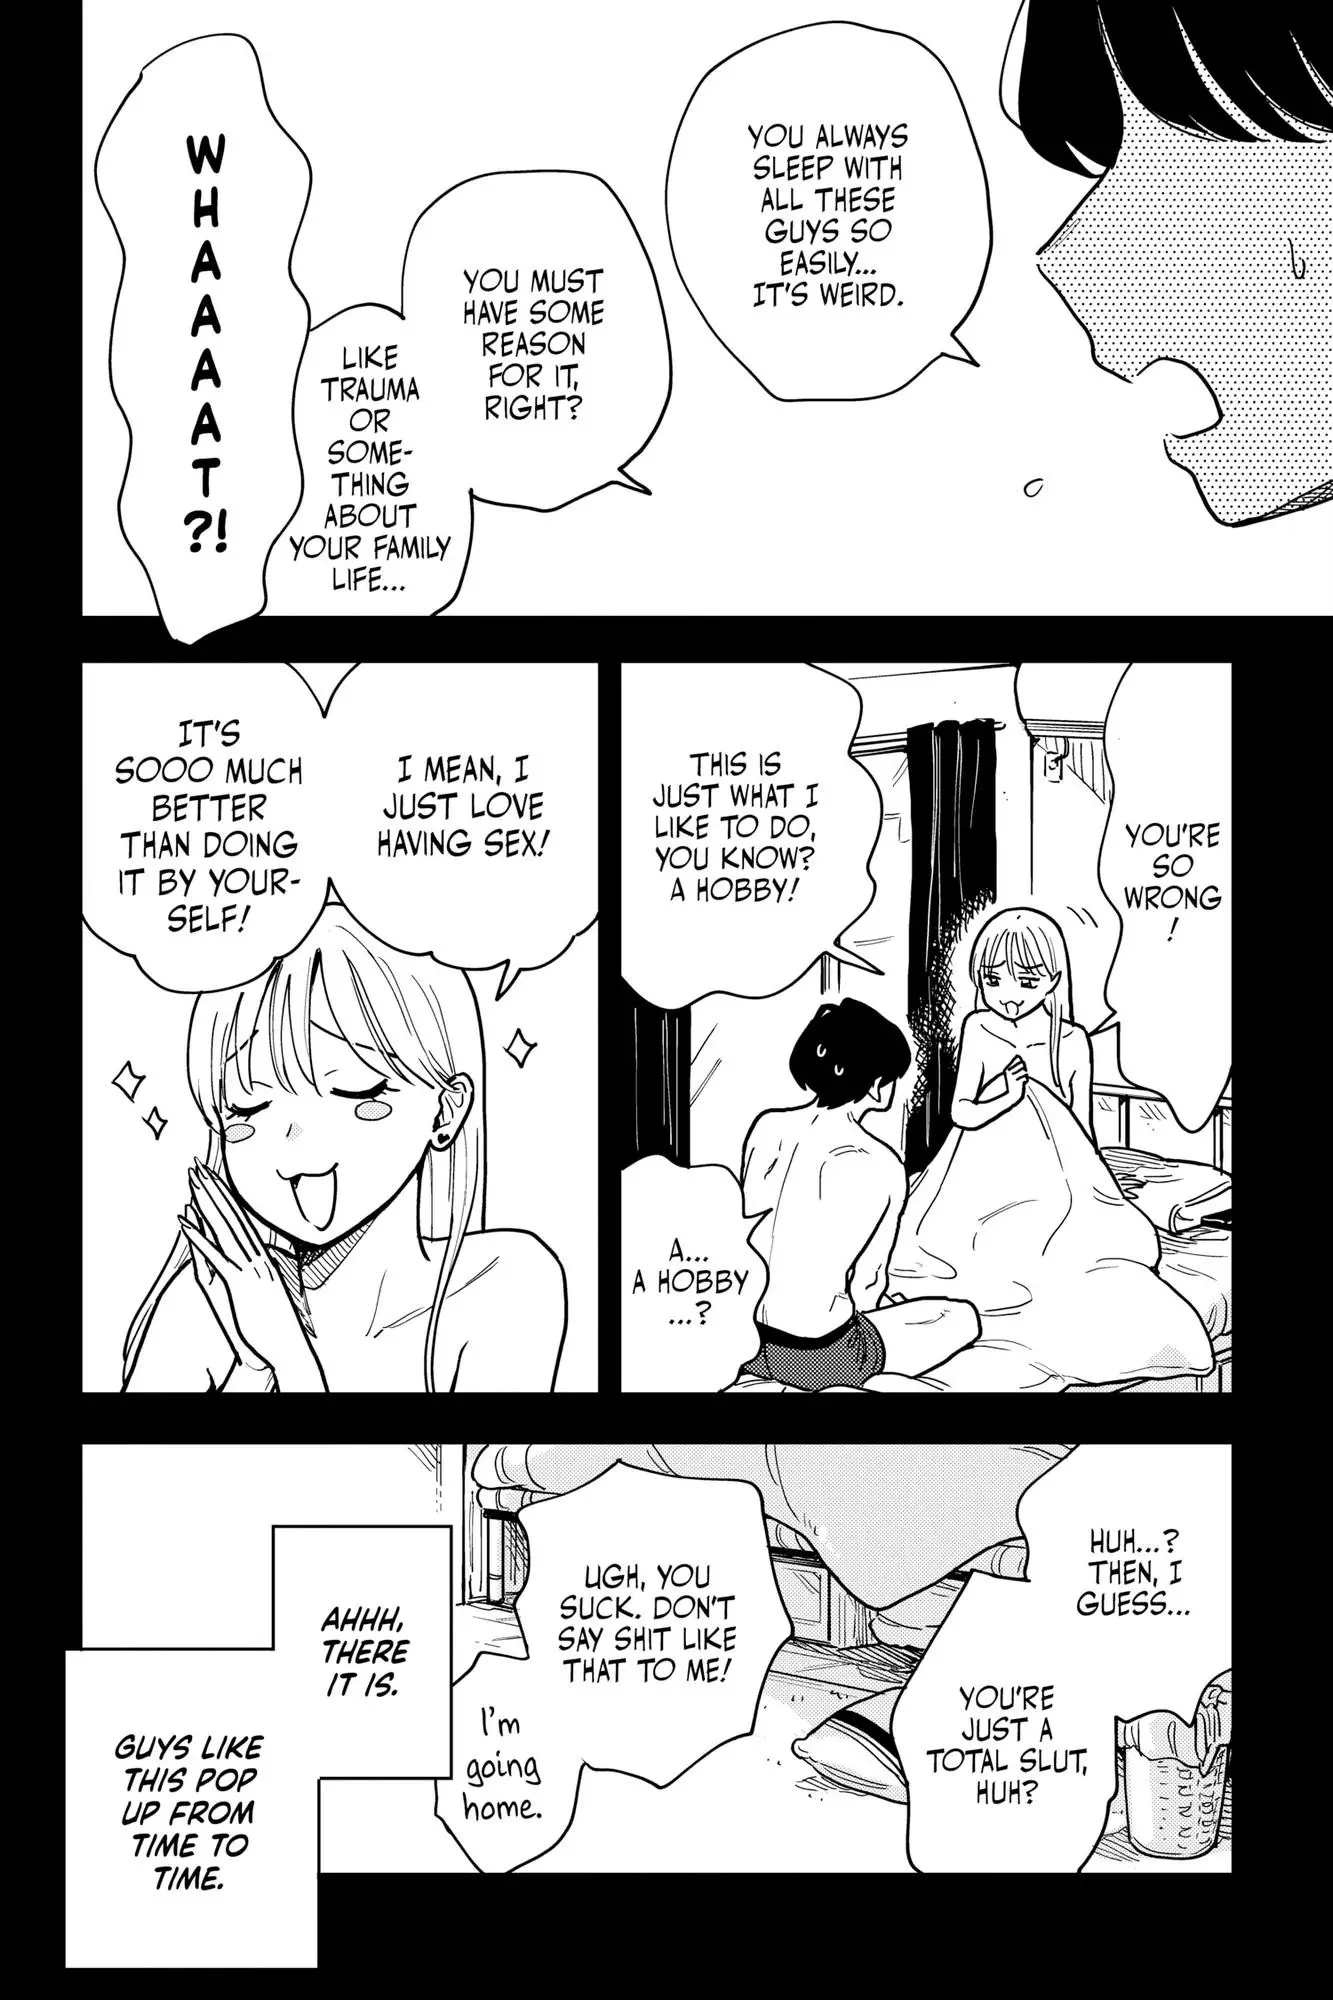 So, Do You Wanna Go Out, Or? - 38 page 3-439c8fed